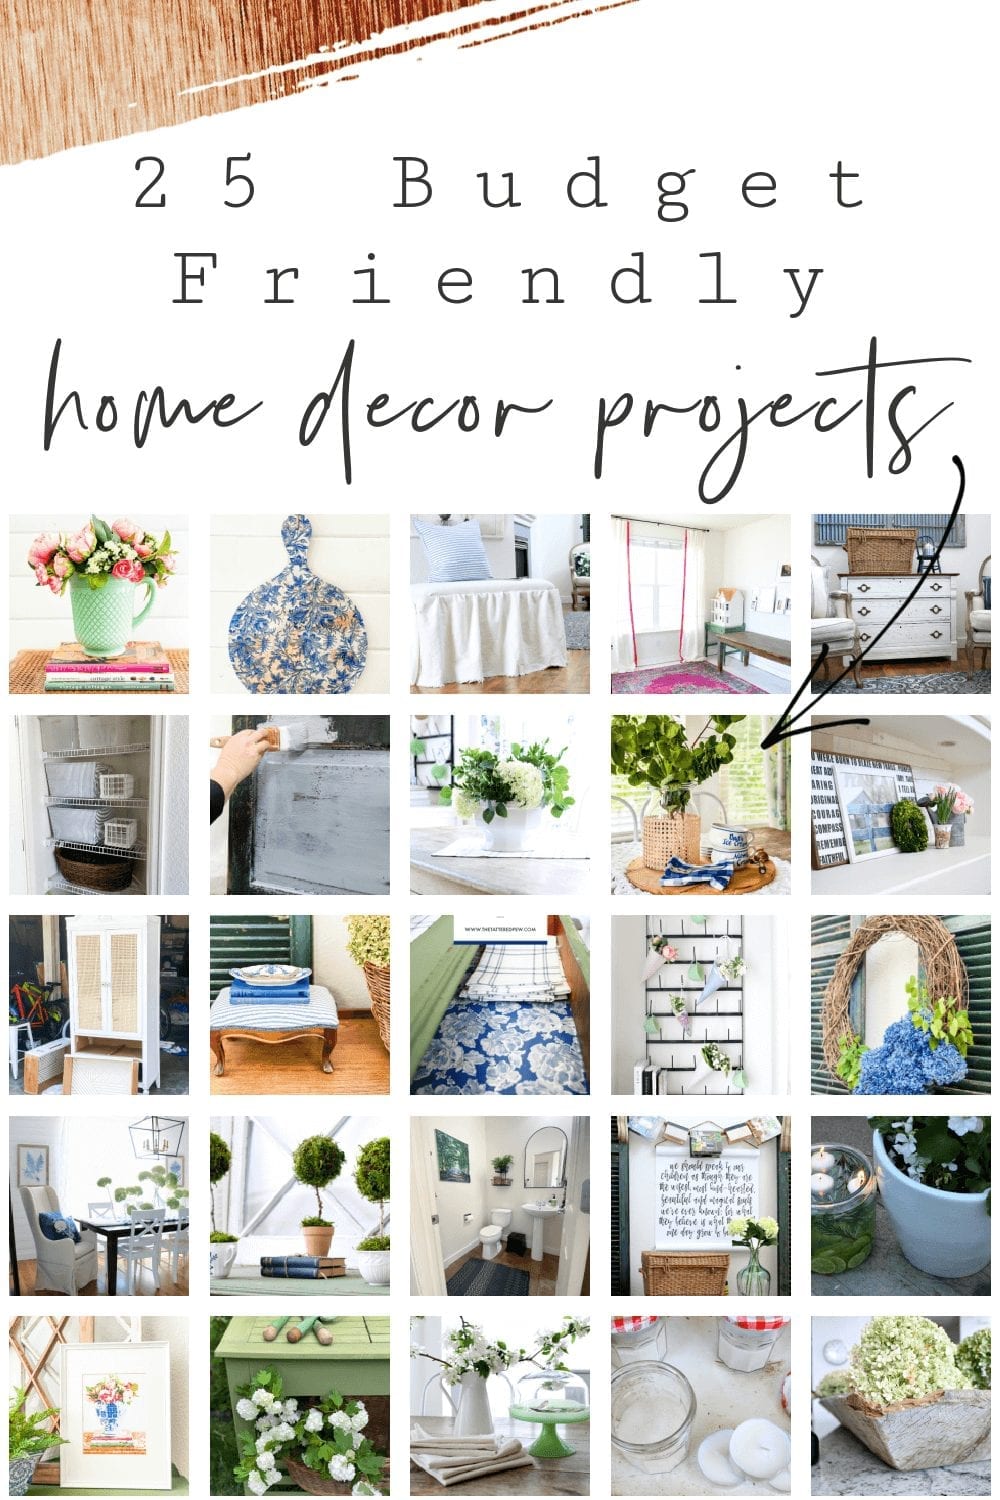 Looking for an easy project? Try these 25 budget friendly home decor ideas!